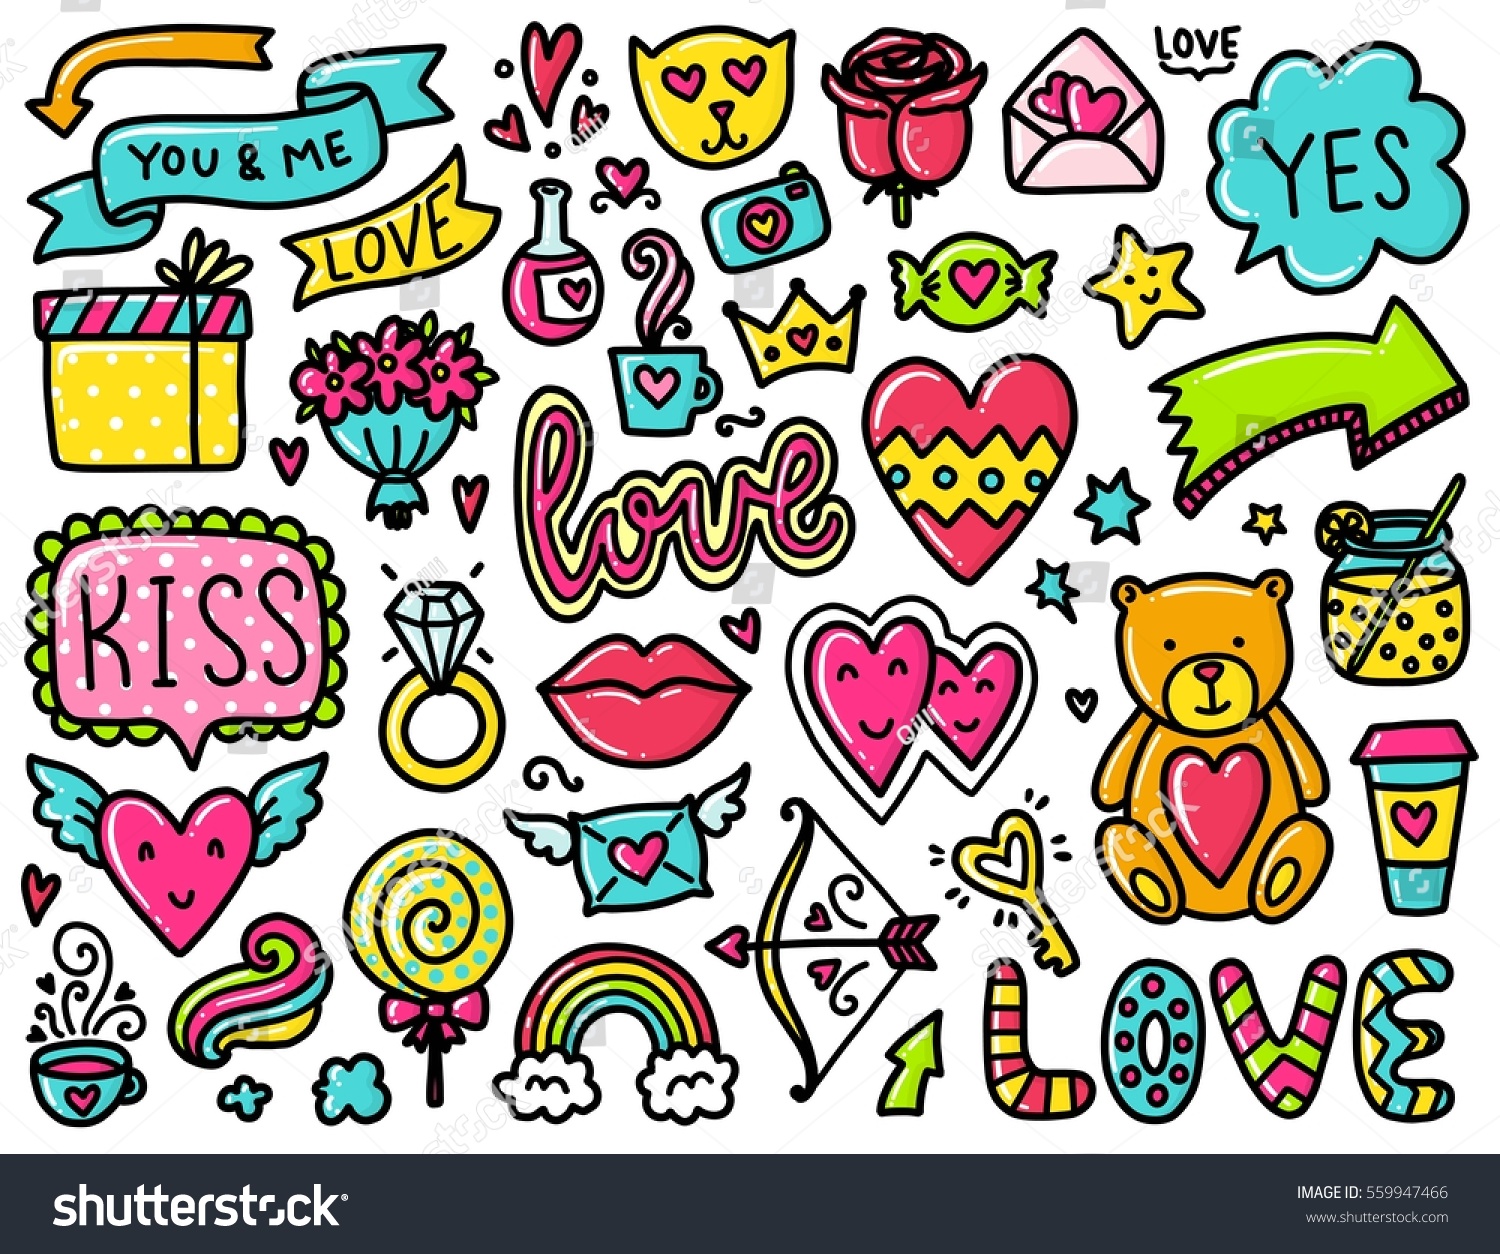 Doodles cute elements. Color vector items. Illustration with hearts and flowers, animals and tea, cloud and stars. Design for prints and cards. Valentine's day theme poster. #559947466